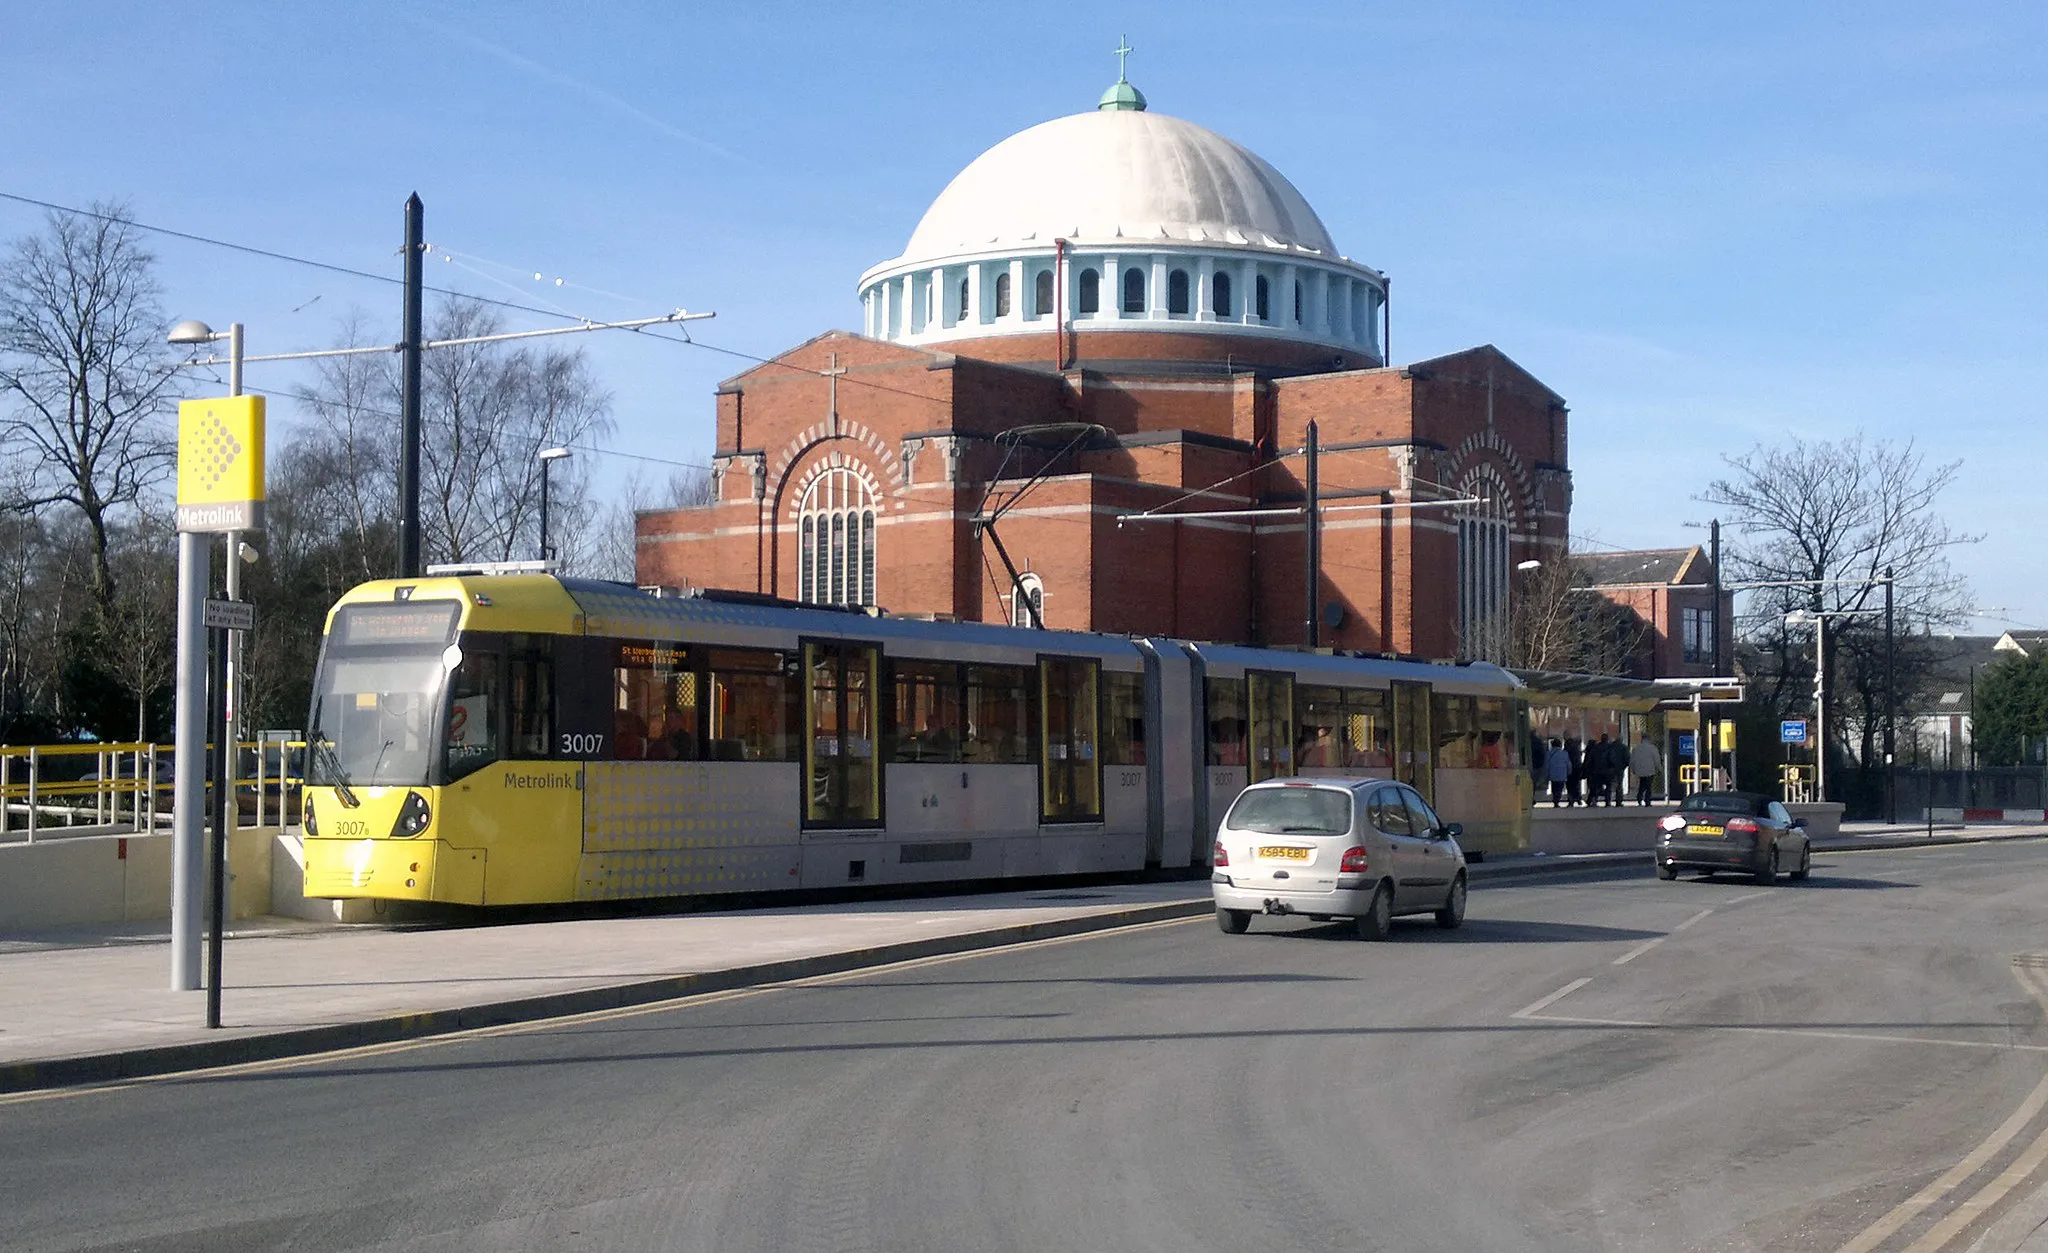 Photo showing: The Metrolink stop at Rochdale Railway Station, in Rochdale, Greater Manchester, England. This photograph was taken on the day Metrolink first started operating passenger services to Rochdale. Behind the stop is Rochdale's landmark St John the Baptist Catholic Church.